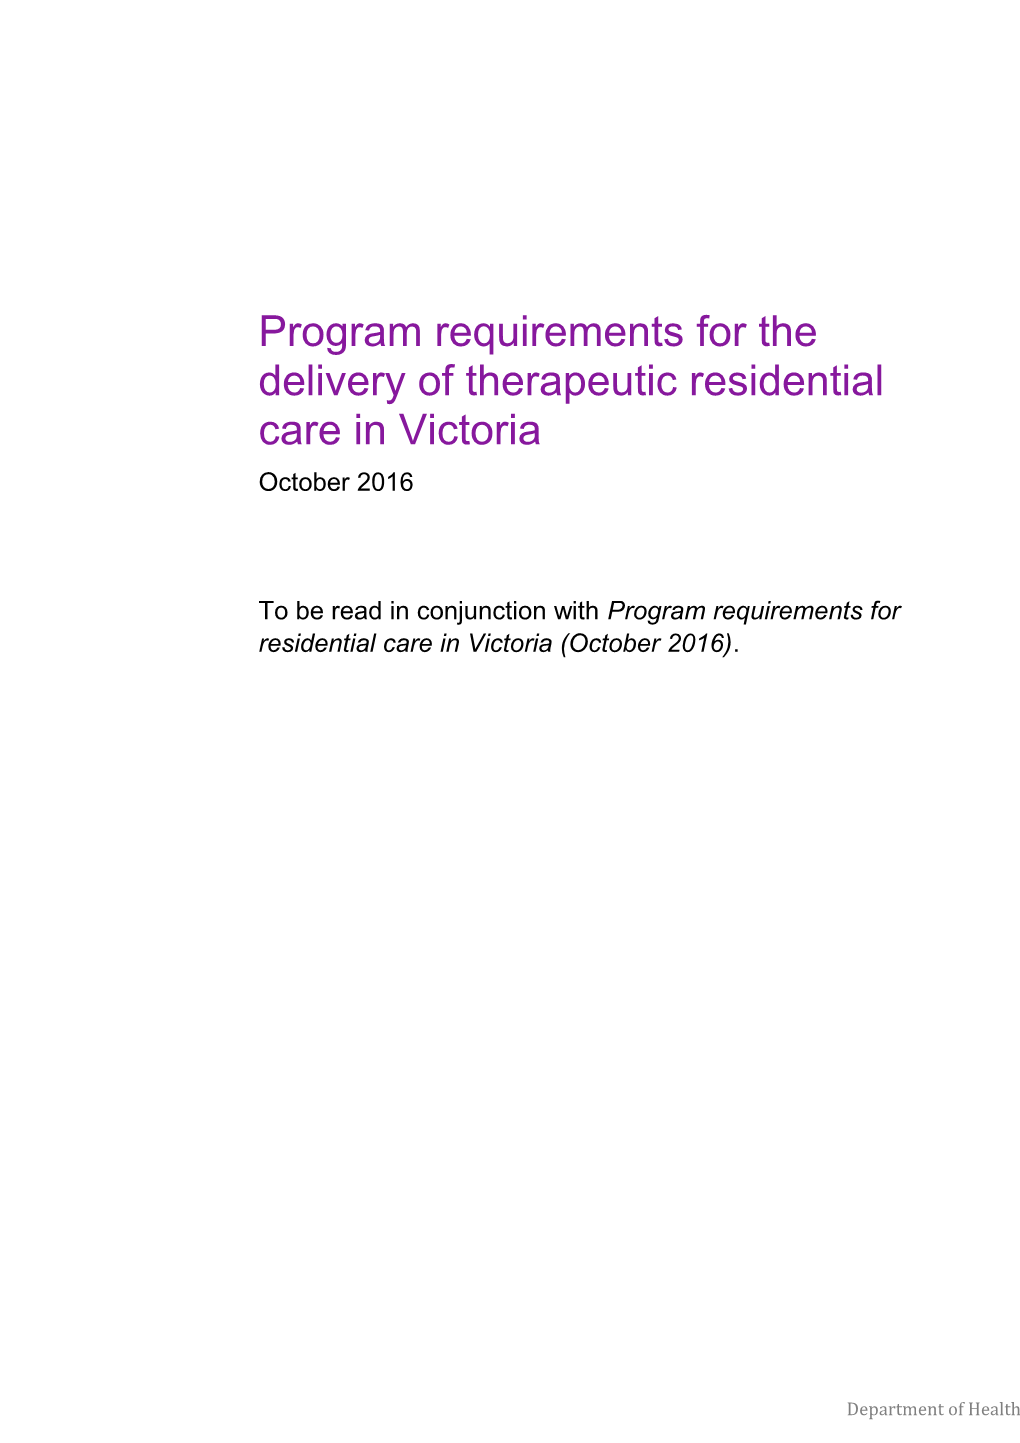 Program Requirements for the Delivery of Therapeutic Residential Care in Victoria October 2016